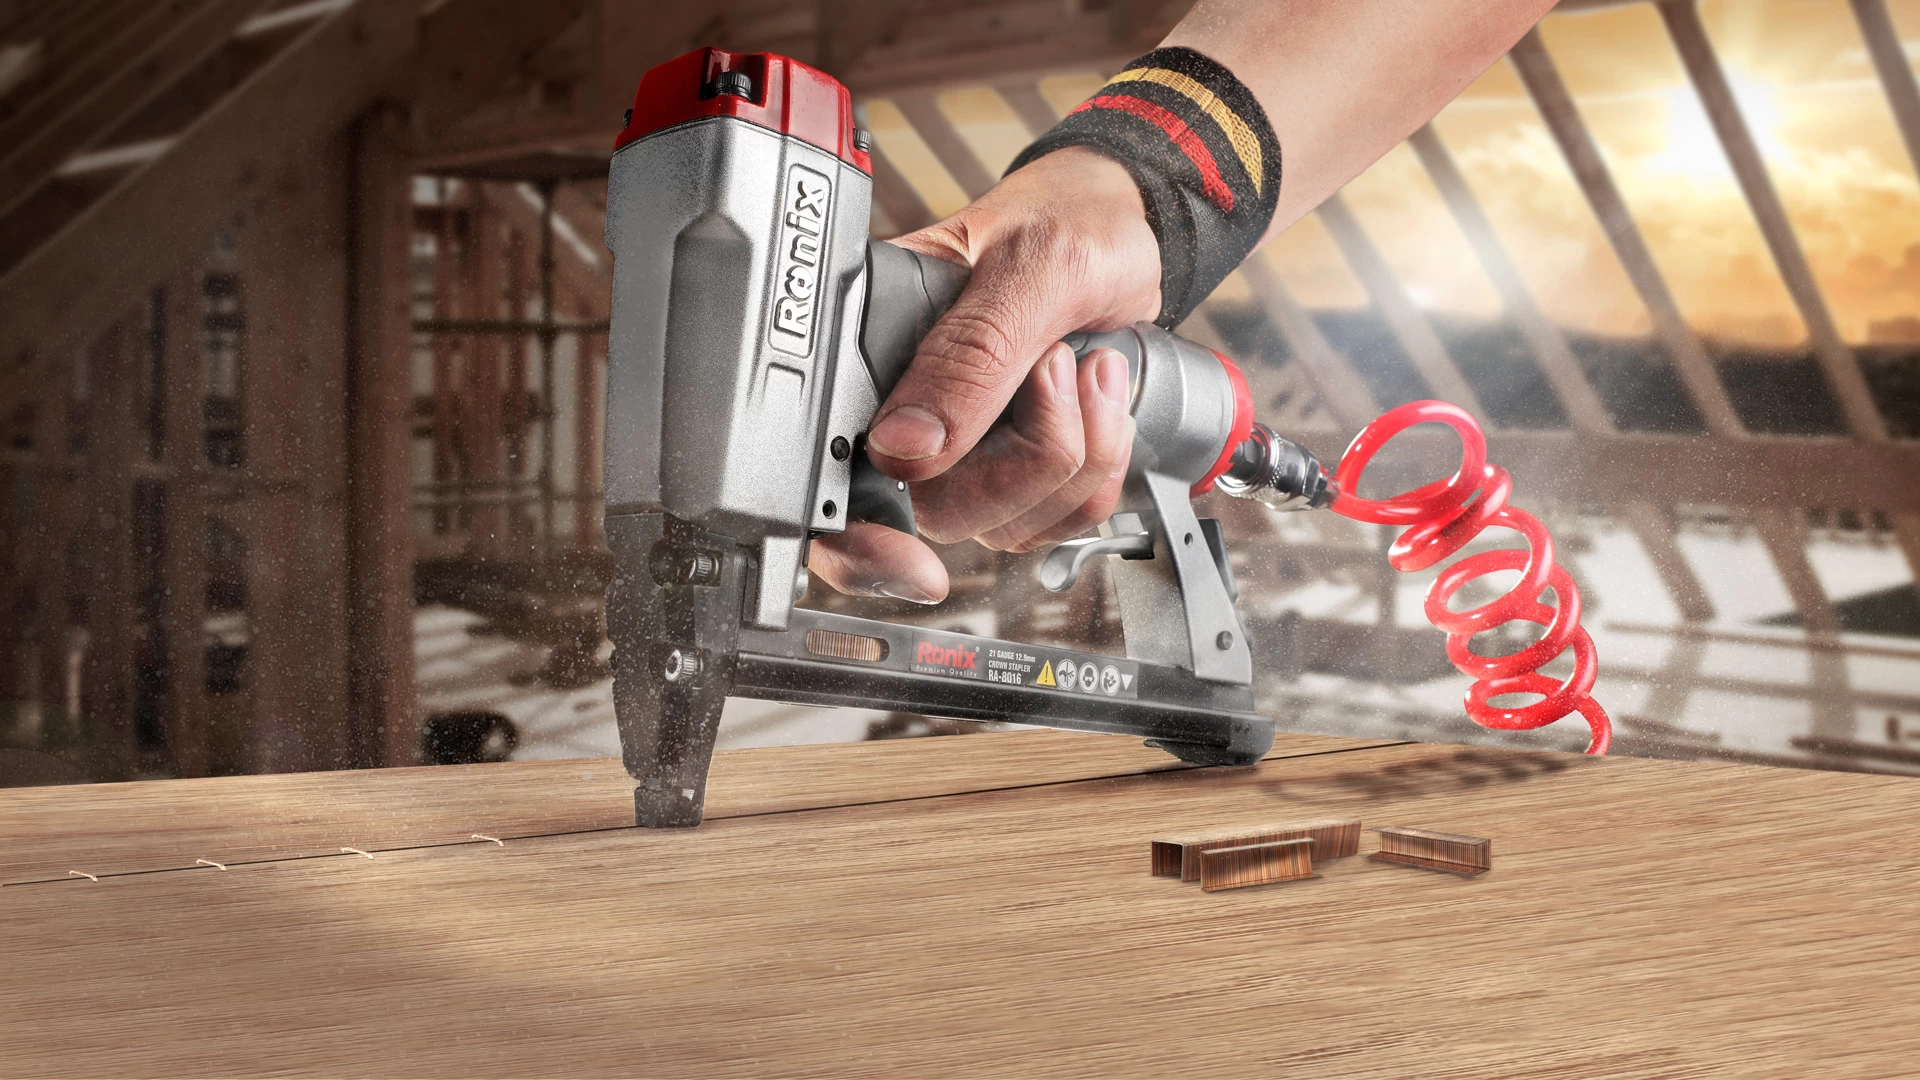 New Generation of Ronix Air Nailer and Staplers